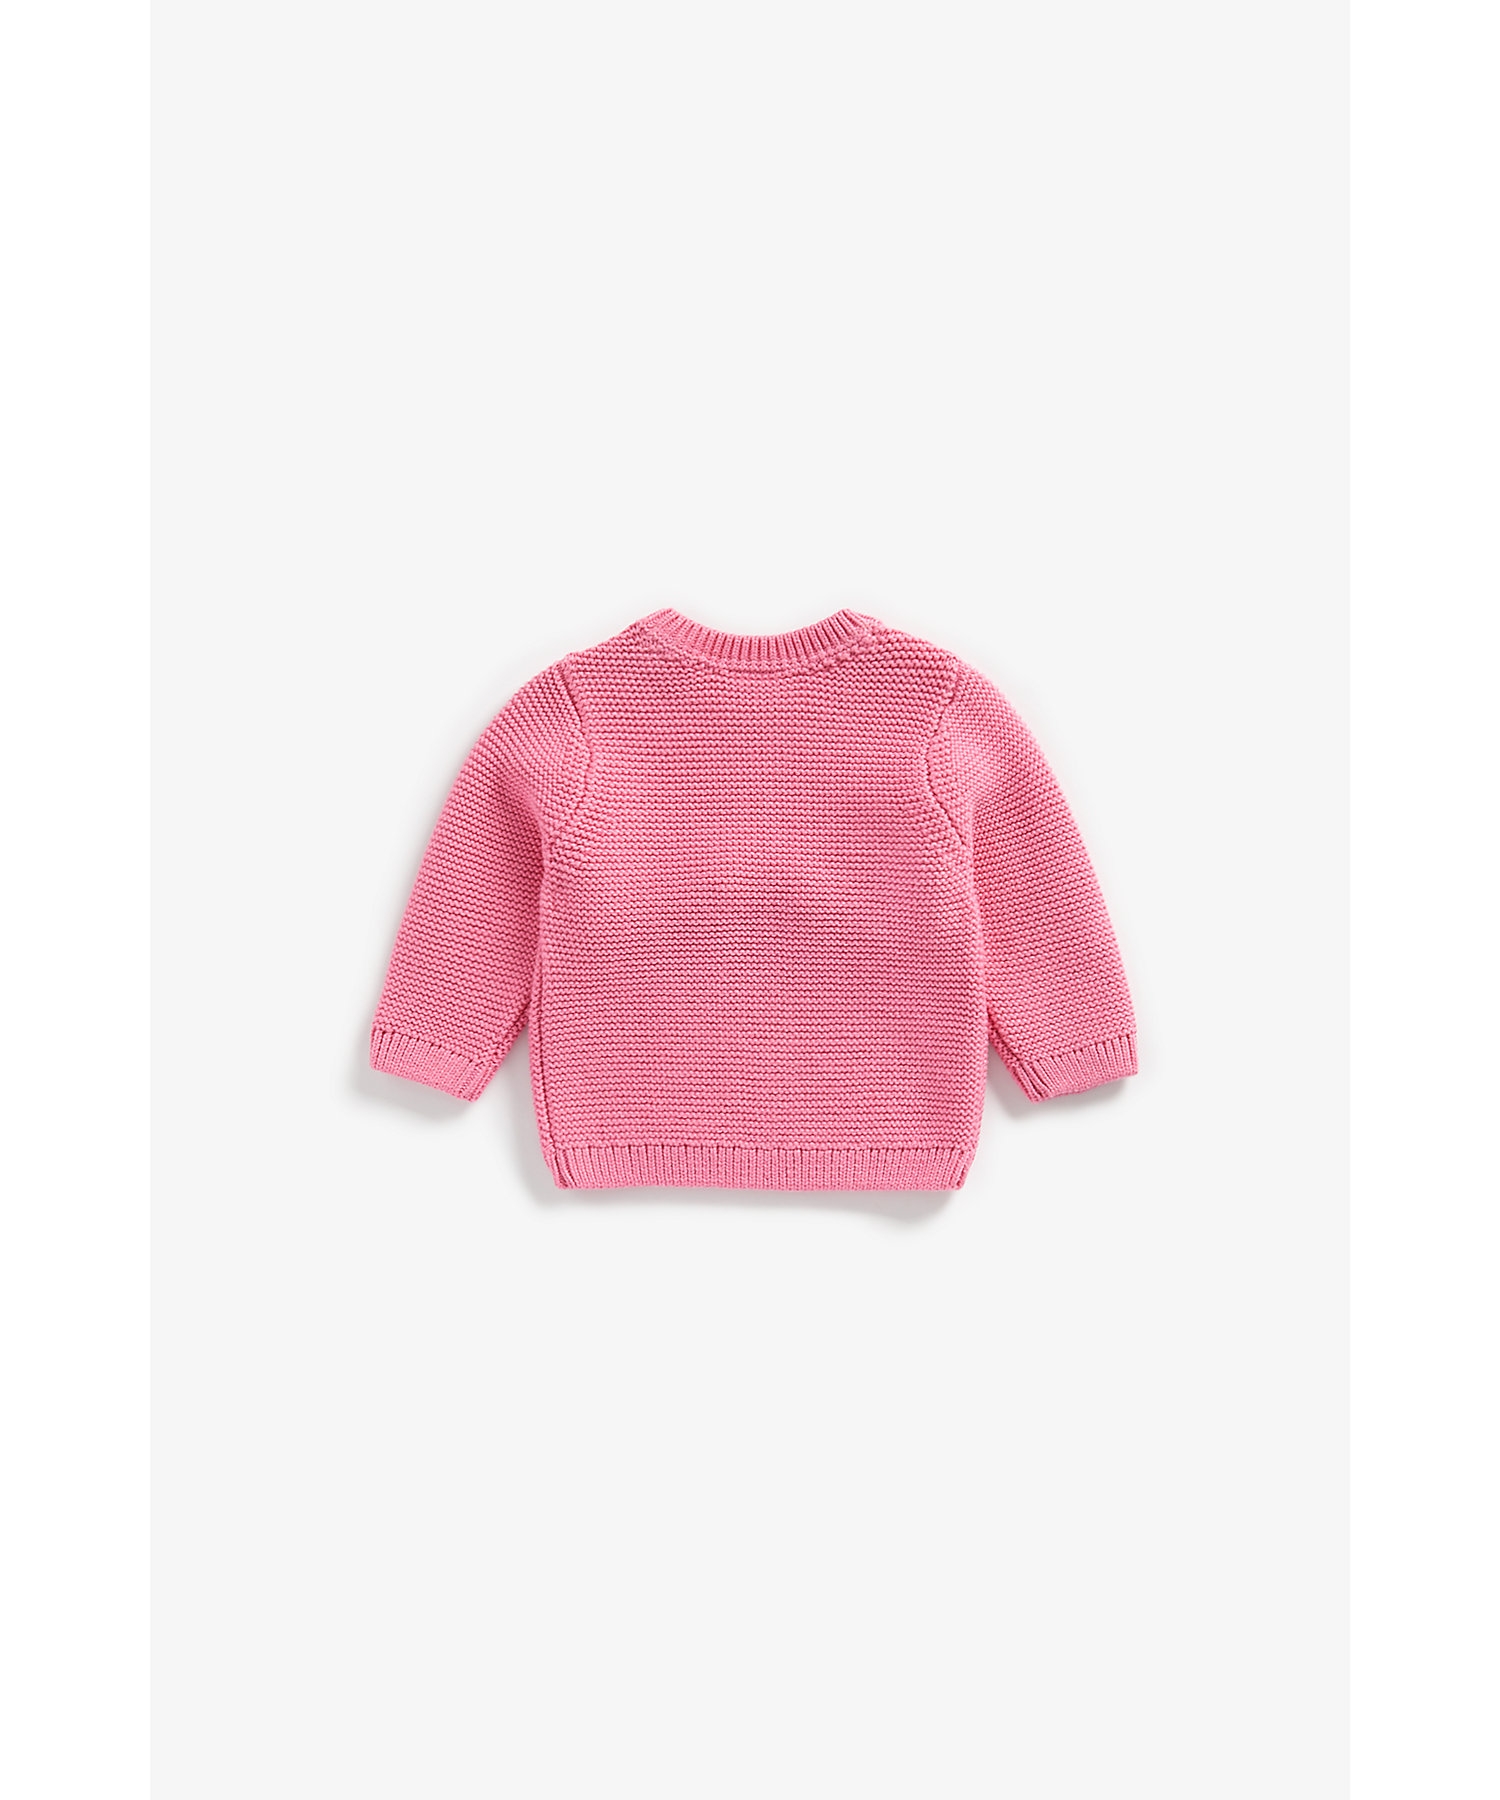 Mothercare | Girls Full Sleeves Sweater Zebra Embroidery And Pom Pom Details - Pink 1